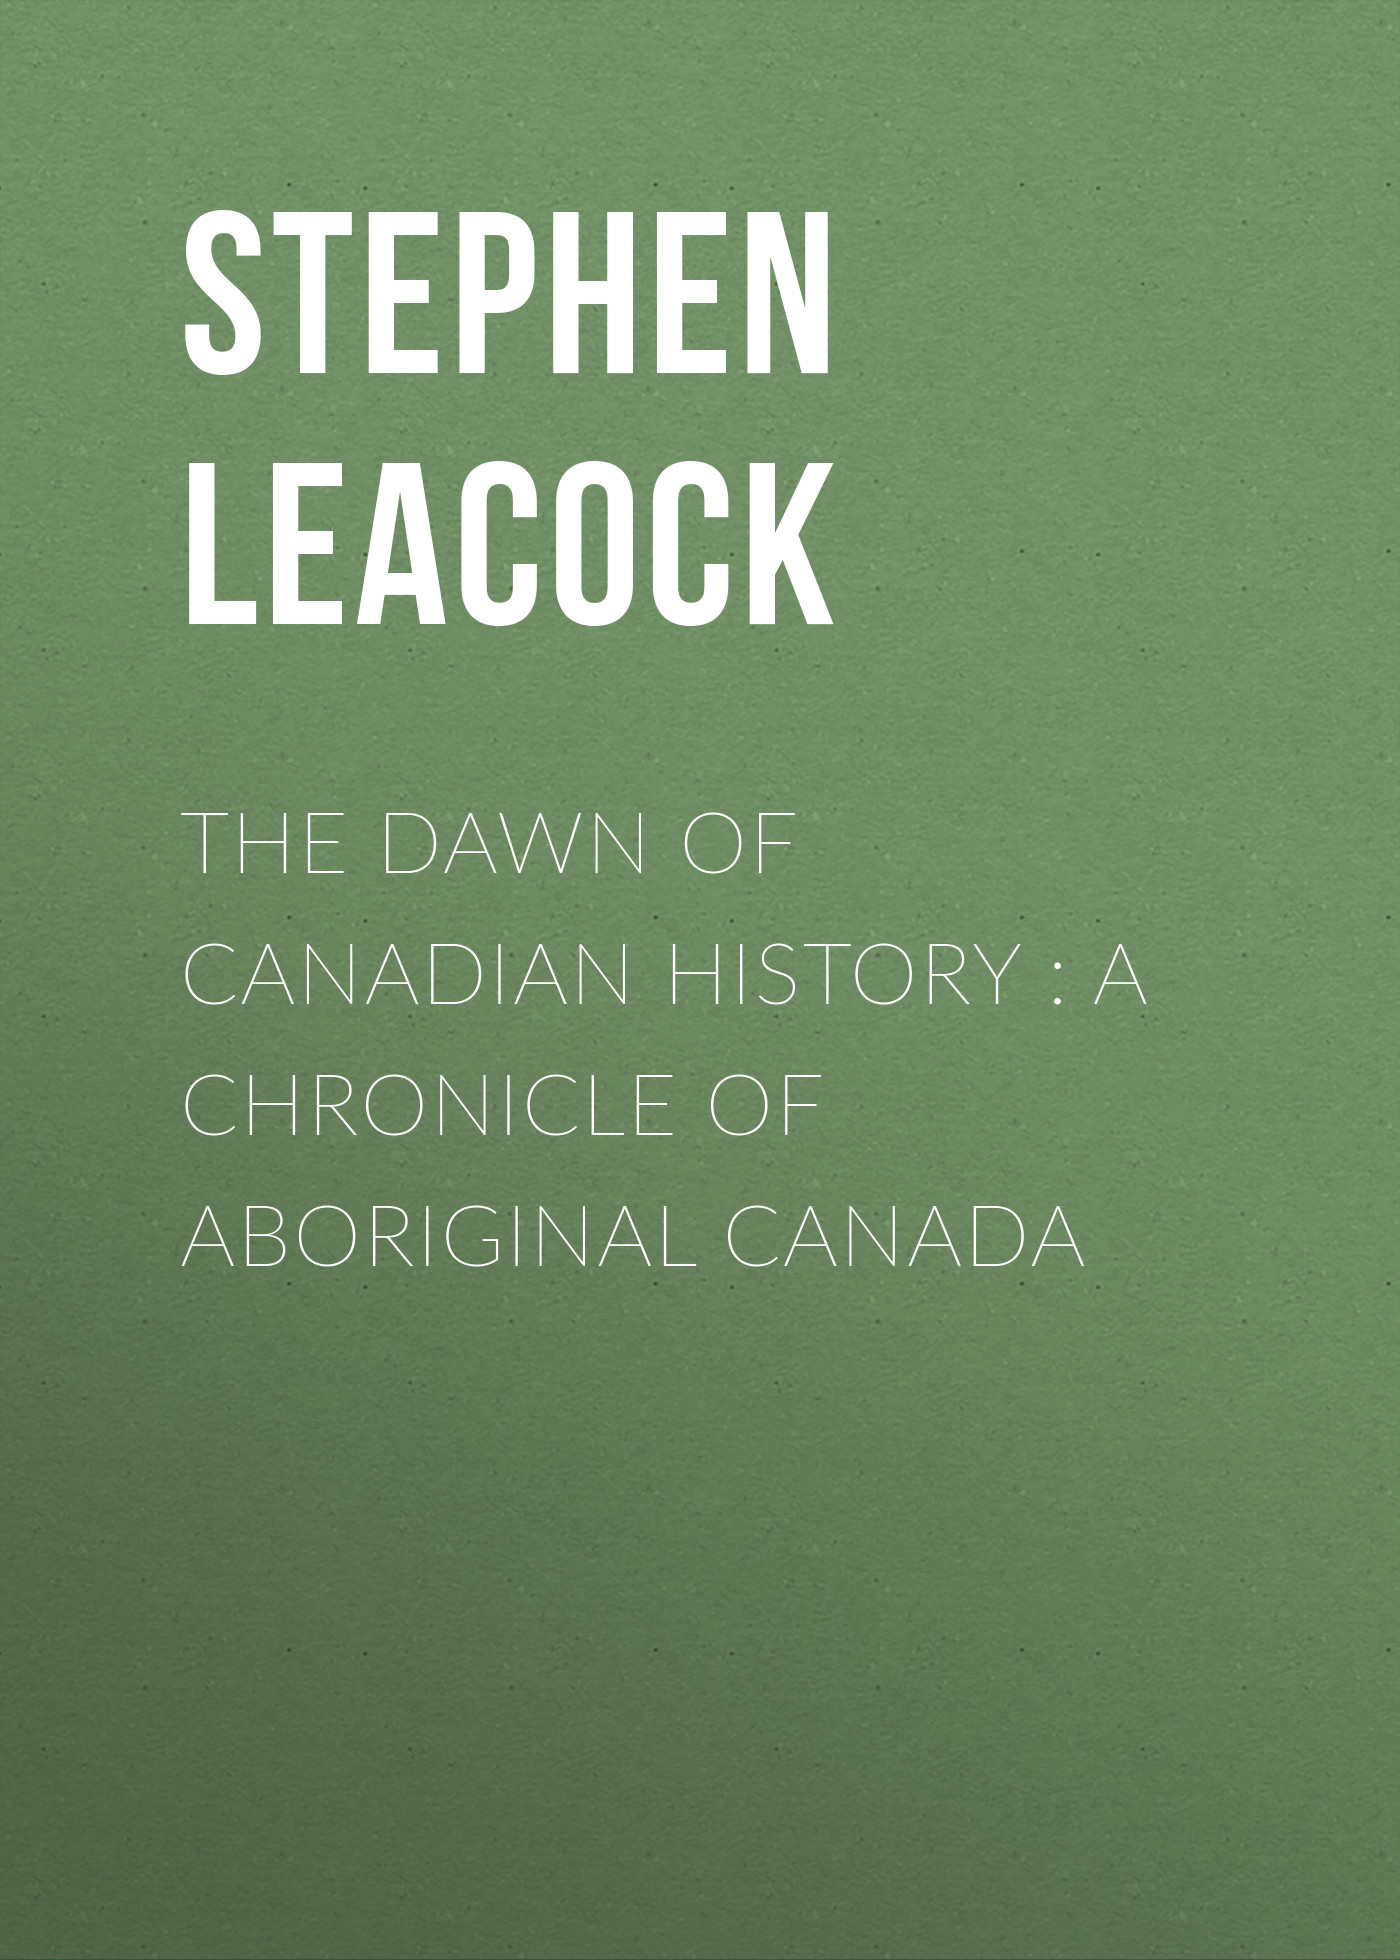 Stephen Leacock The Dawn of Canadian History : A Chronicle of Aboriginal Canada